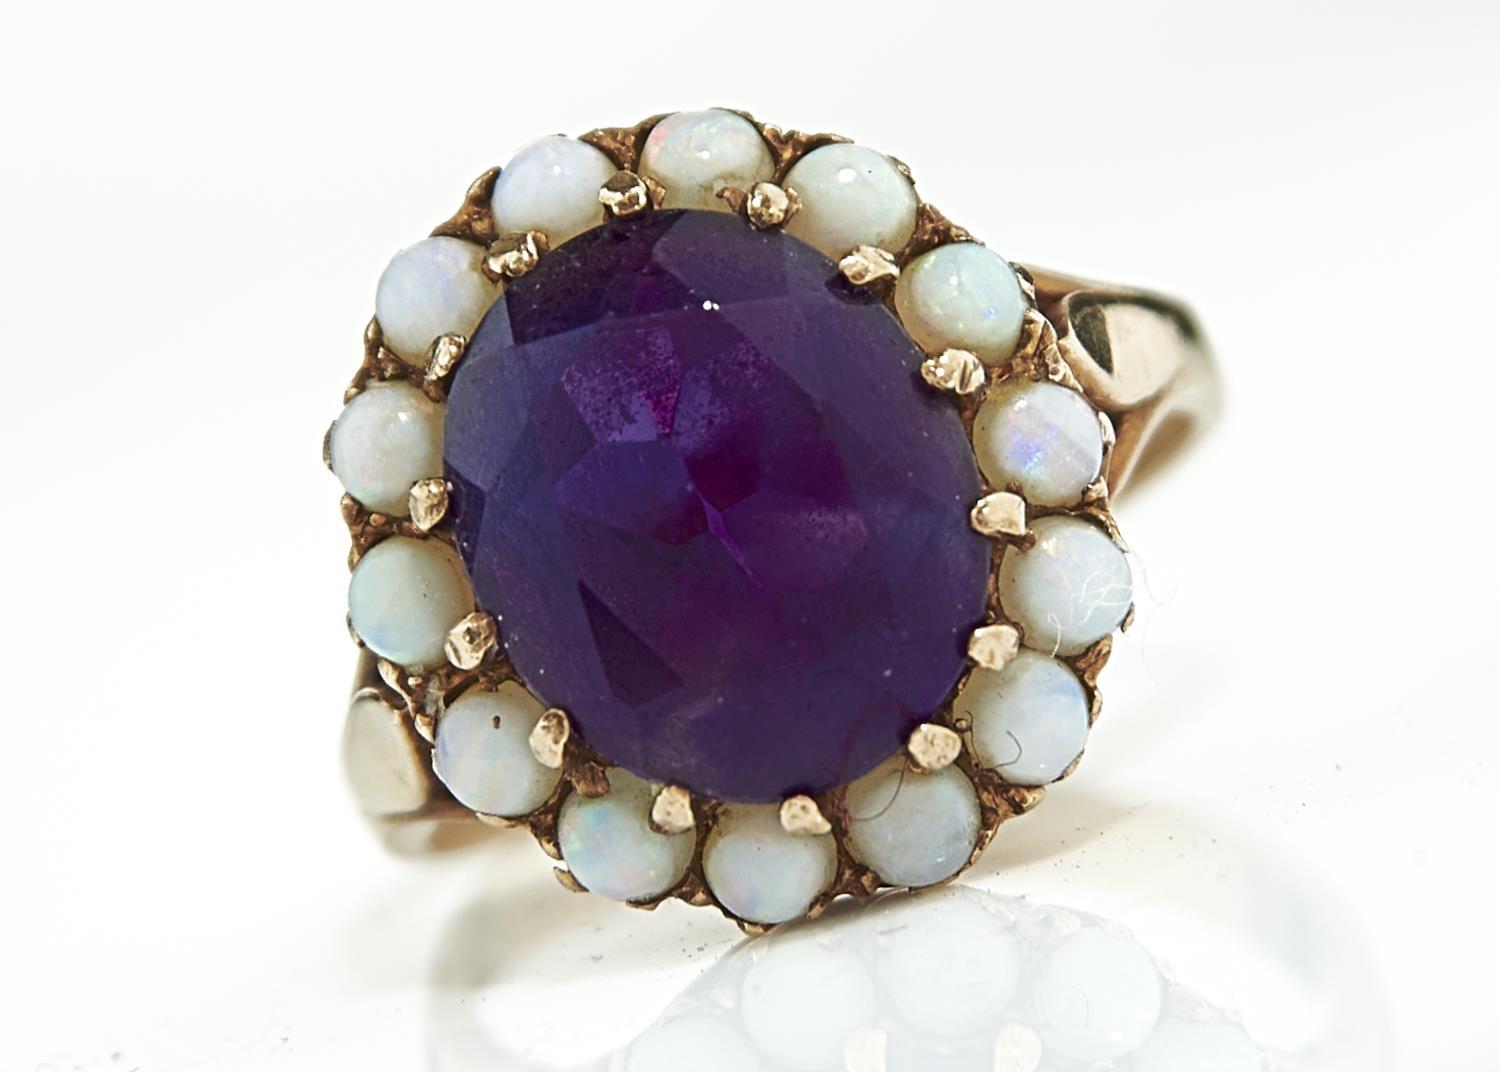 AN AMETHYST AND OPAL CLUSTER RING IN 9CT GOLD, BIRMINGHAM, DATE LETTER RUBBED, 4.3G, SIZE P Amethyst